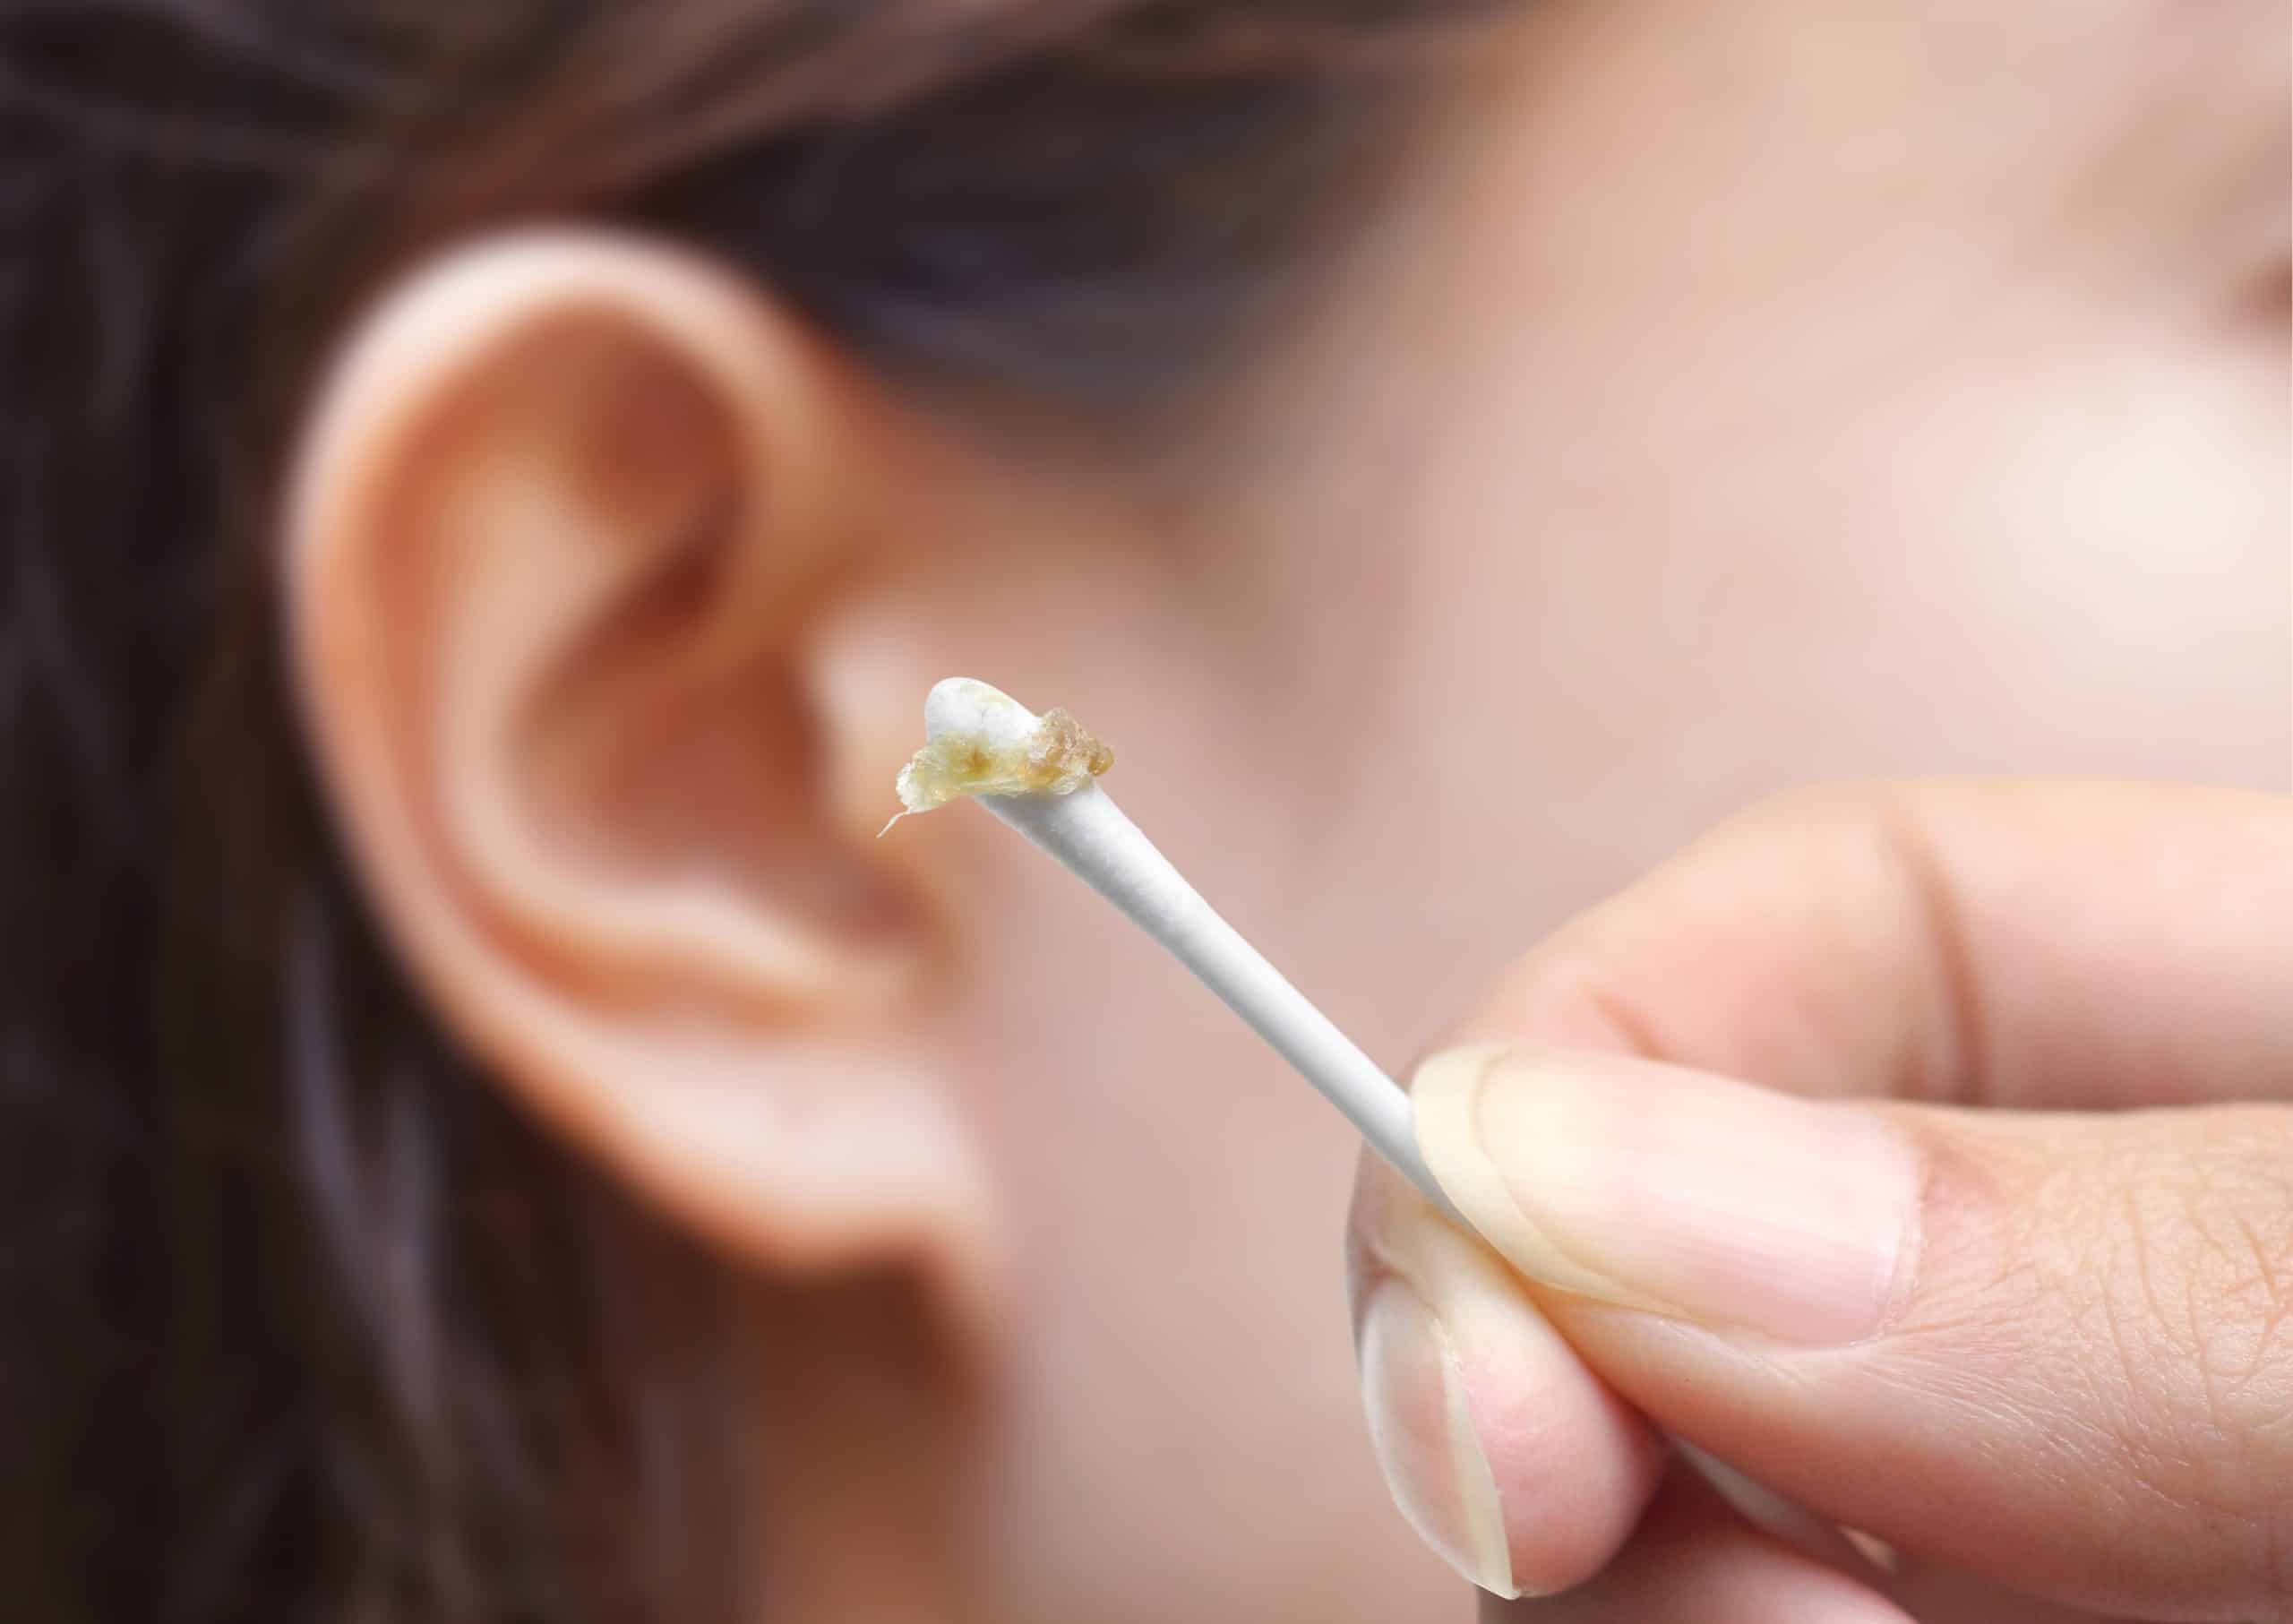 Can ear wax removal cause bleeding?